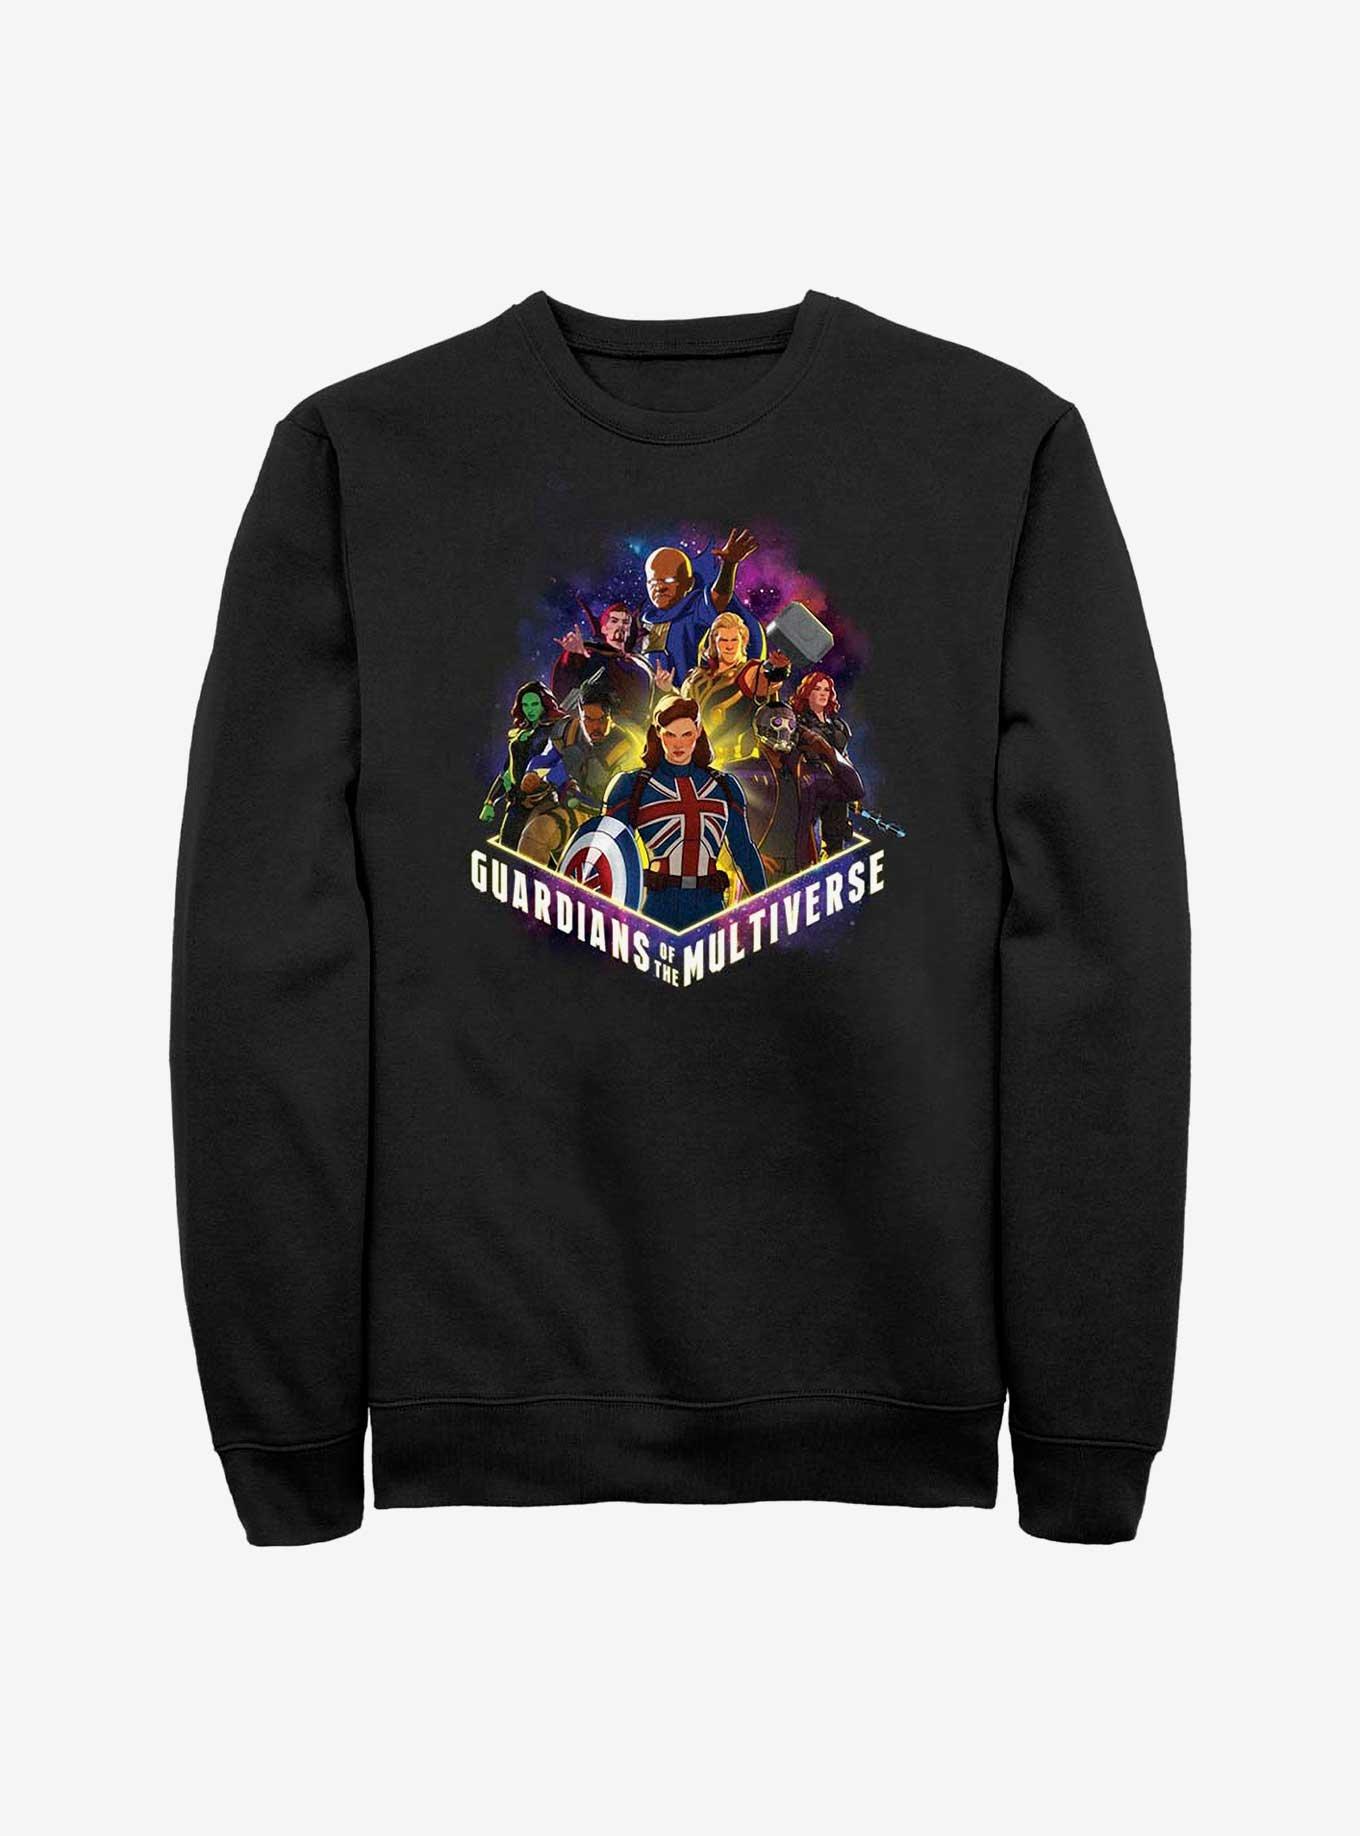 What If...? Guardians Of The Multiverse Poster Sweatshirt, BLACK, hi-res